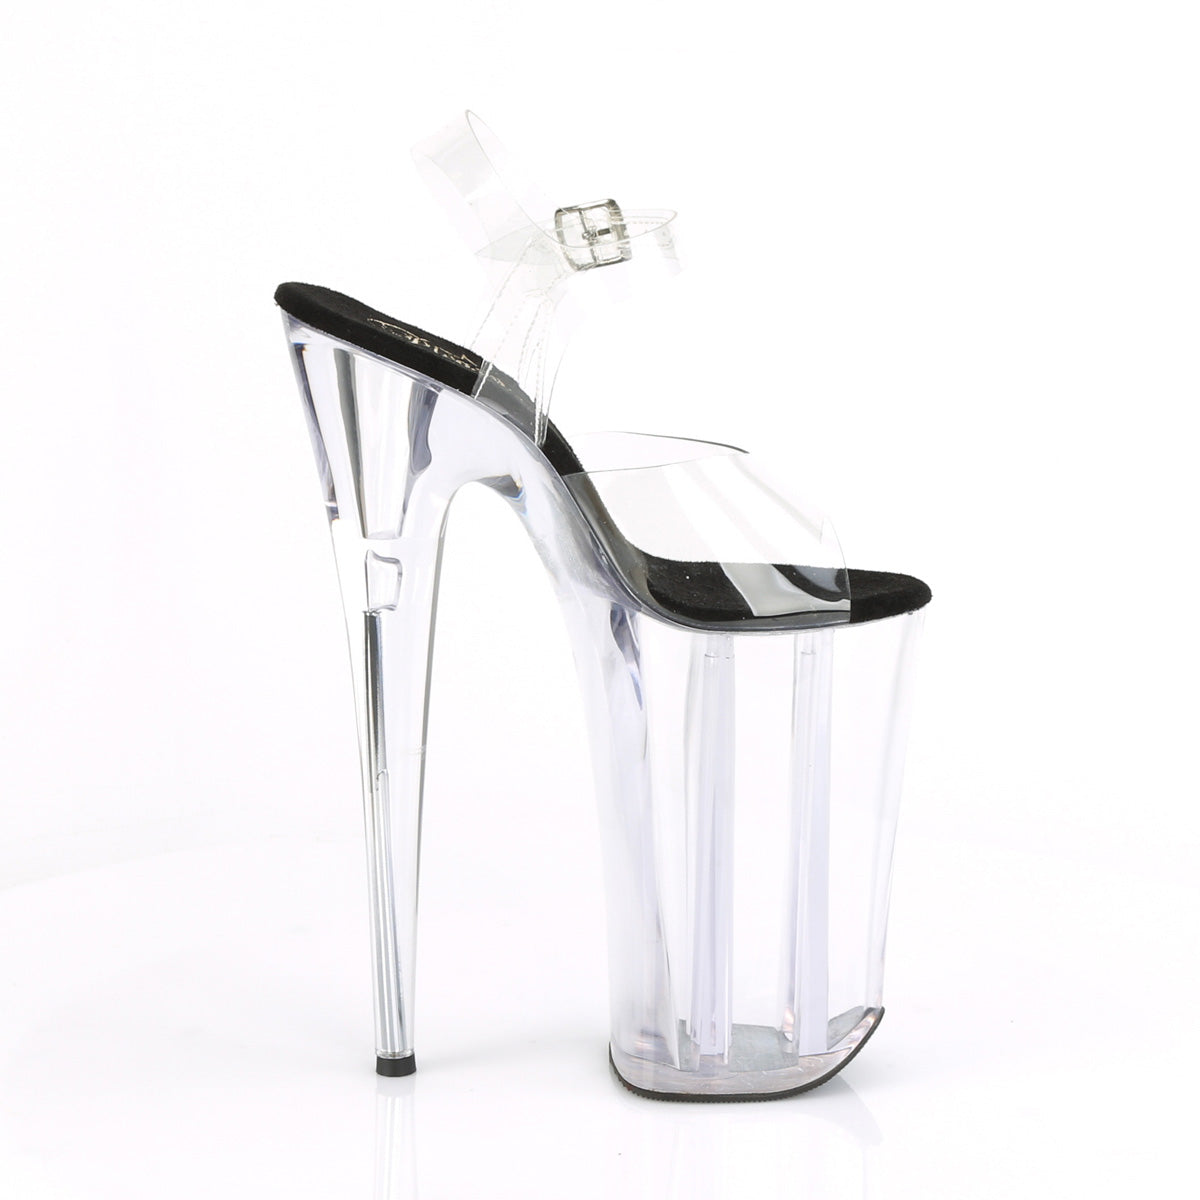 BEYOND-008 Sexy 10" Heel Clear & Black Pole Dancer -Pleaser- Sexy Shoes Fetish Heels